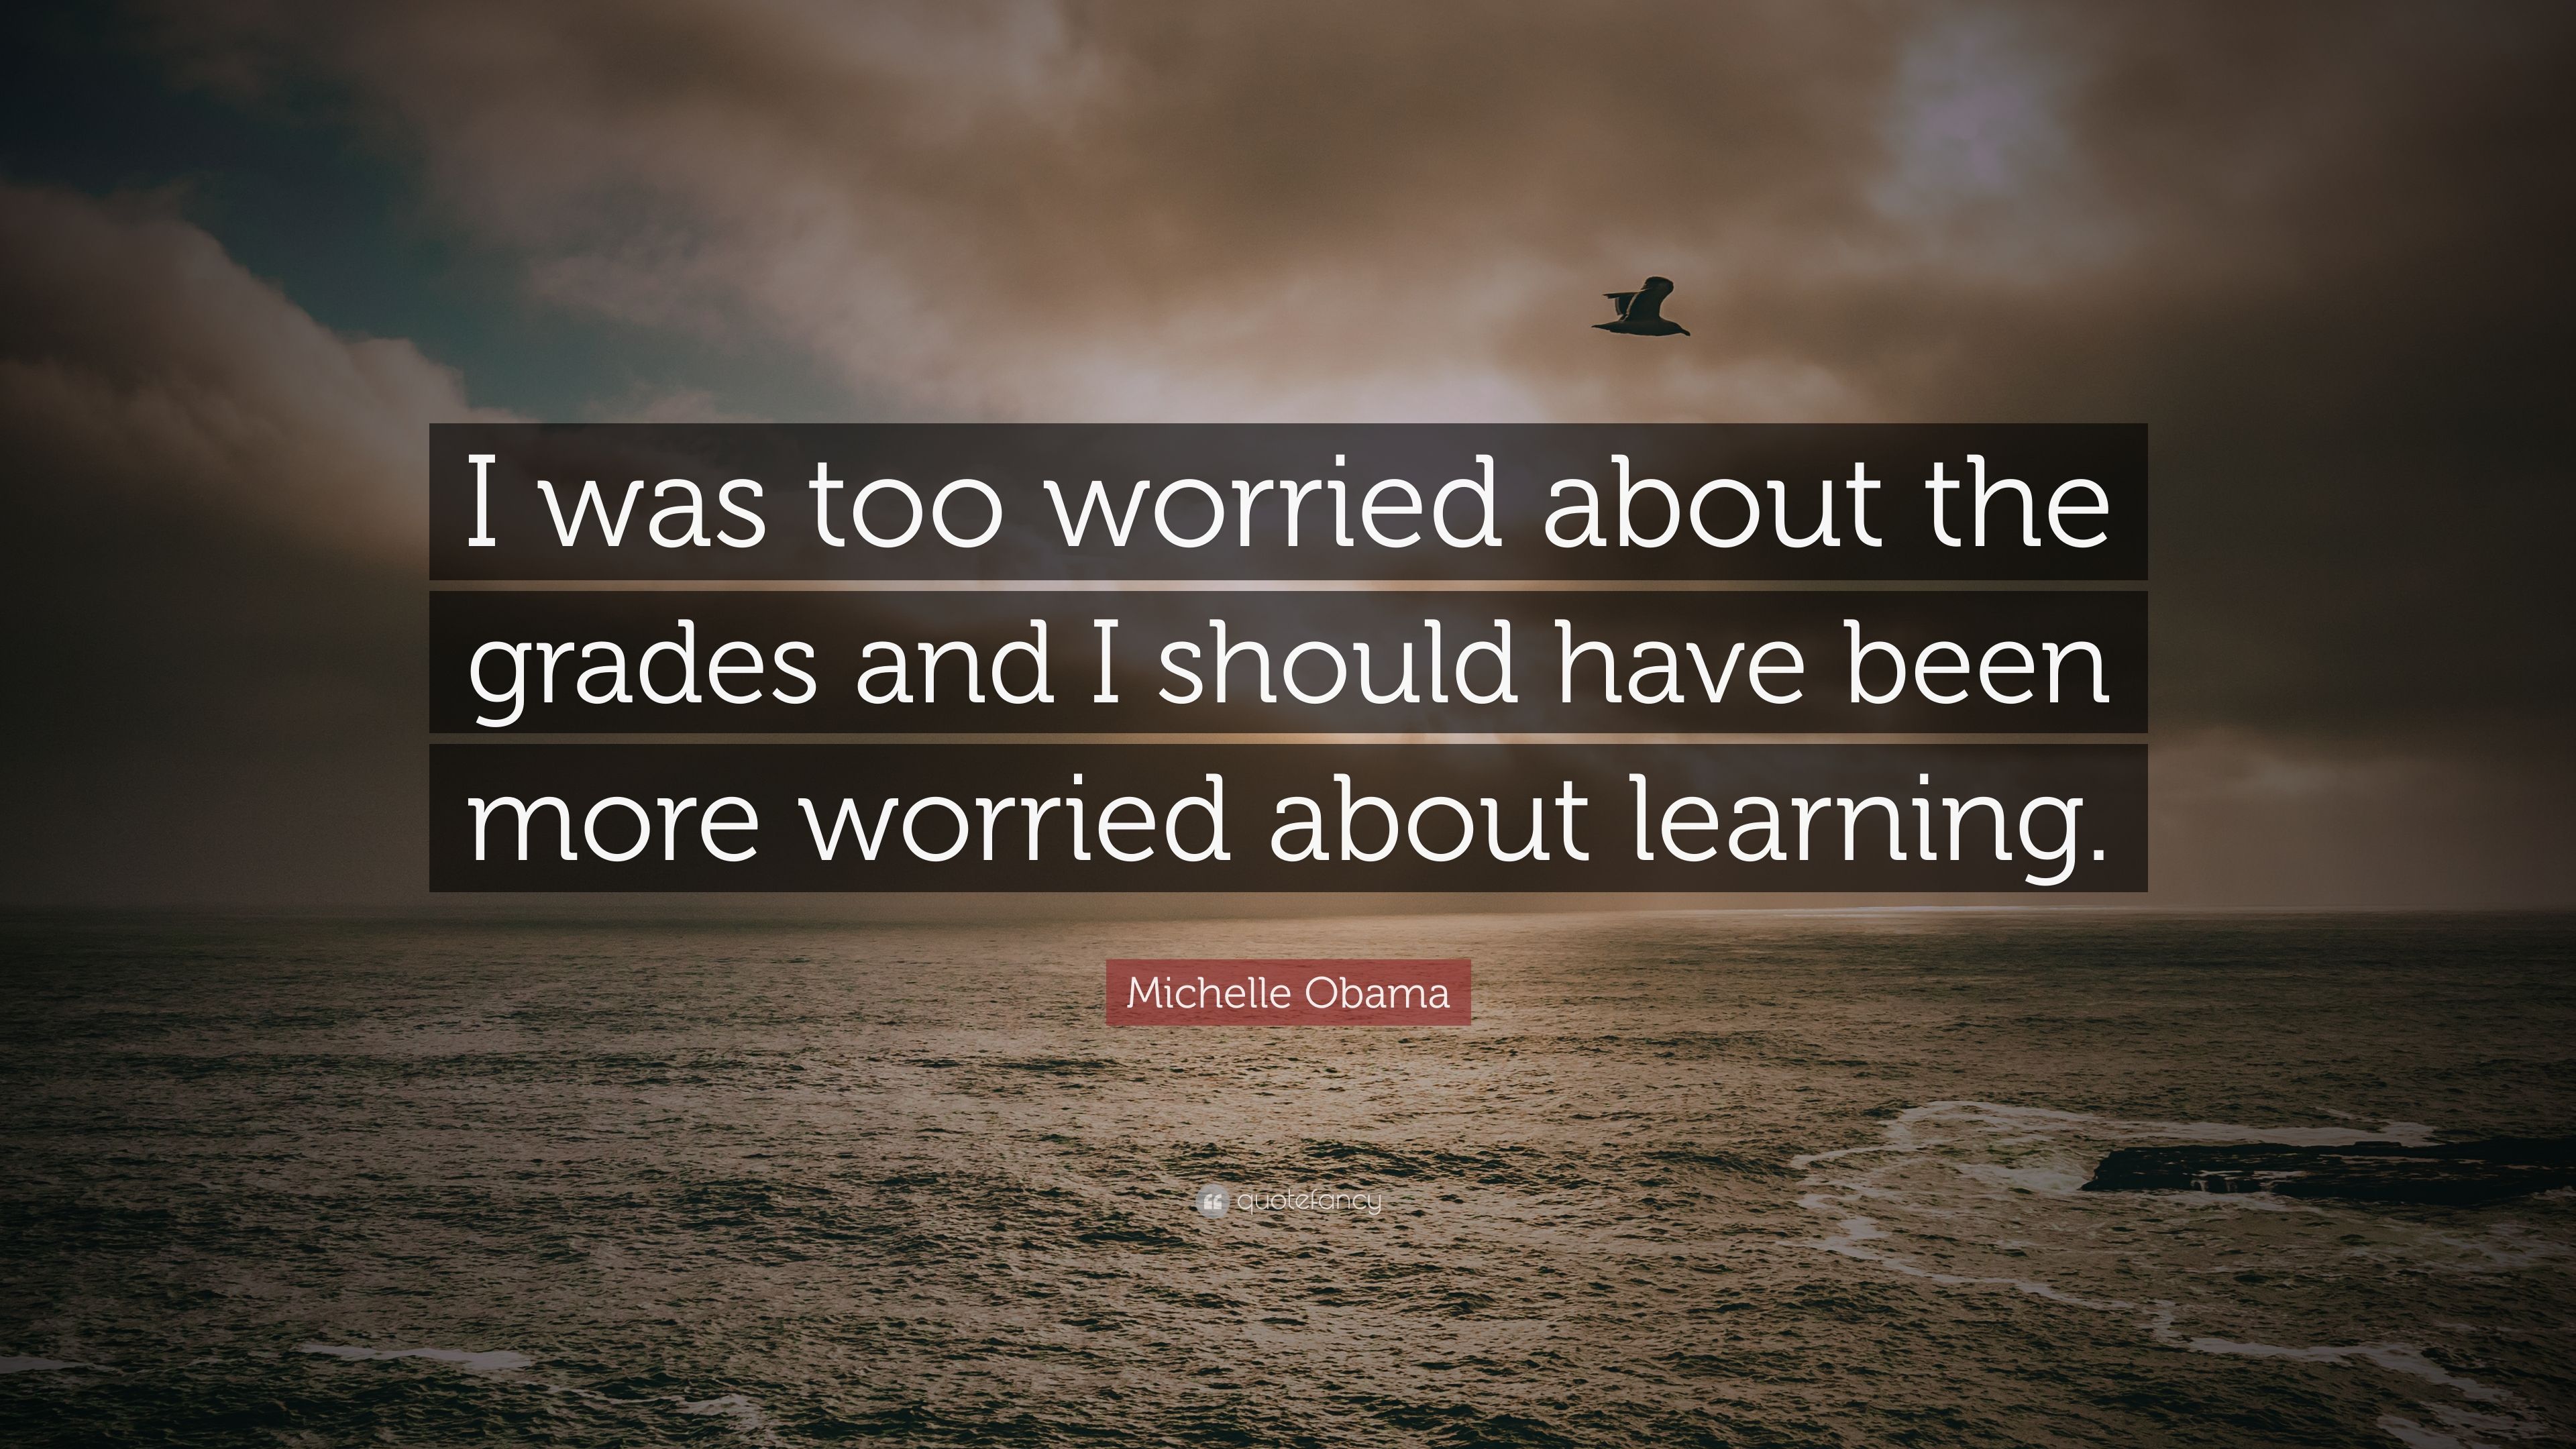 Michelle Obama Quote: “I was too worried about the grades and I should have been more worried about learning.” (9 wallpaper)